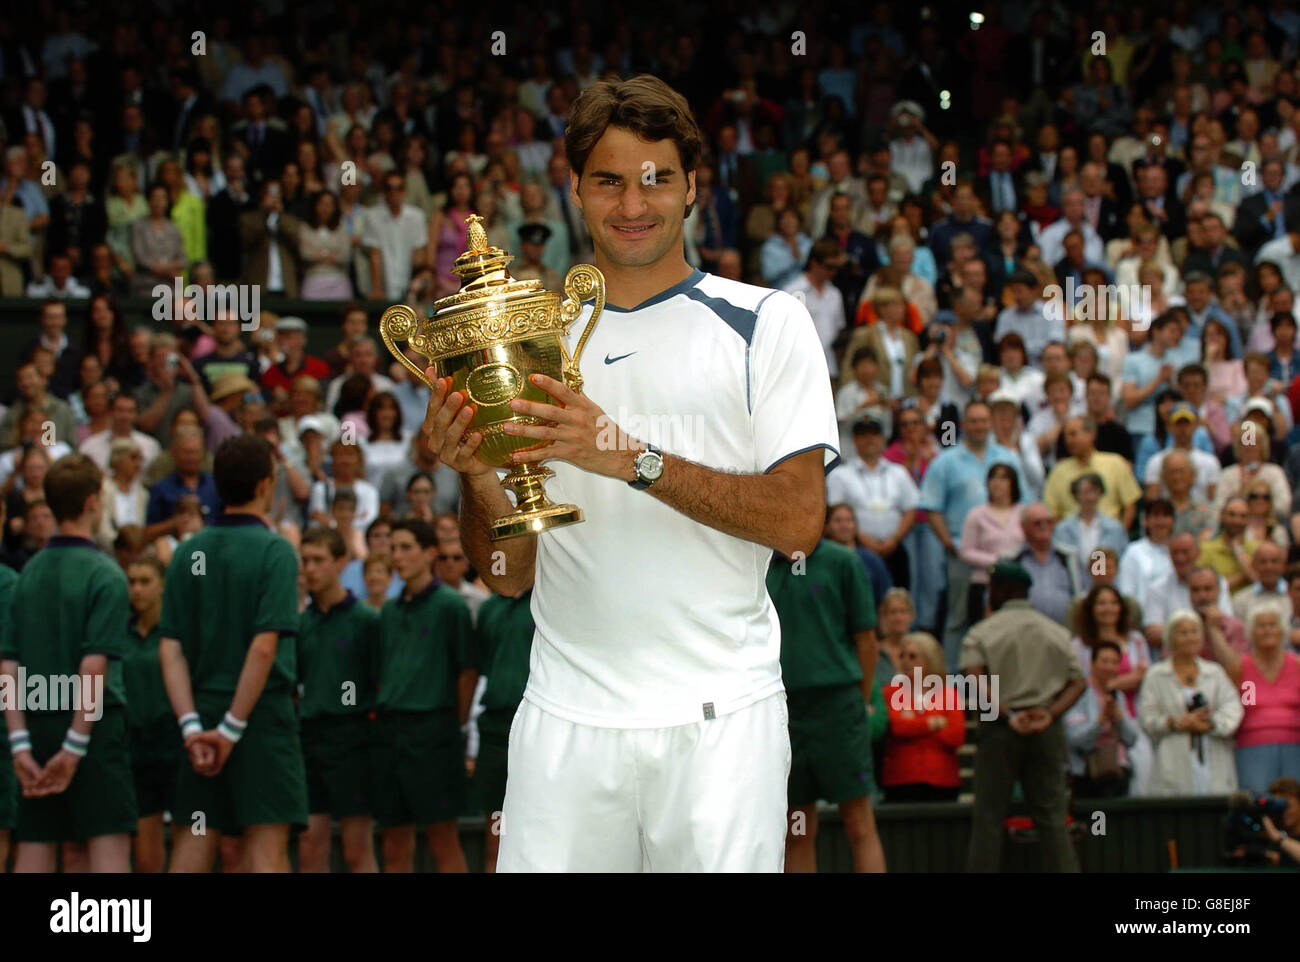 Tennis - Wimbledon Championships 2005 - Men's Final - Roger Federer v Andy  Roddick - All England Club. Roger Federer with the trophy after defeating  Andy Roddick Stock Photo - Alamy